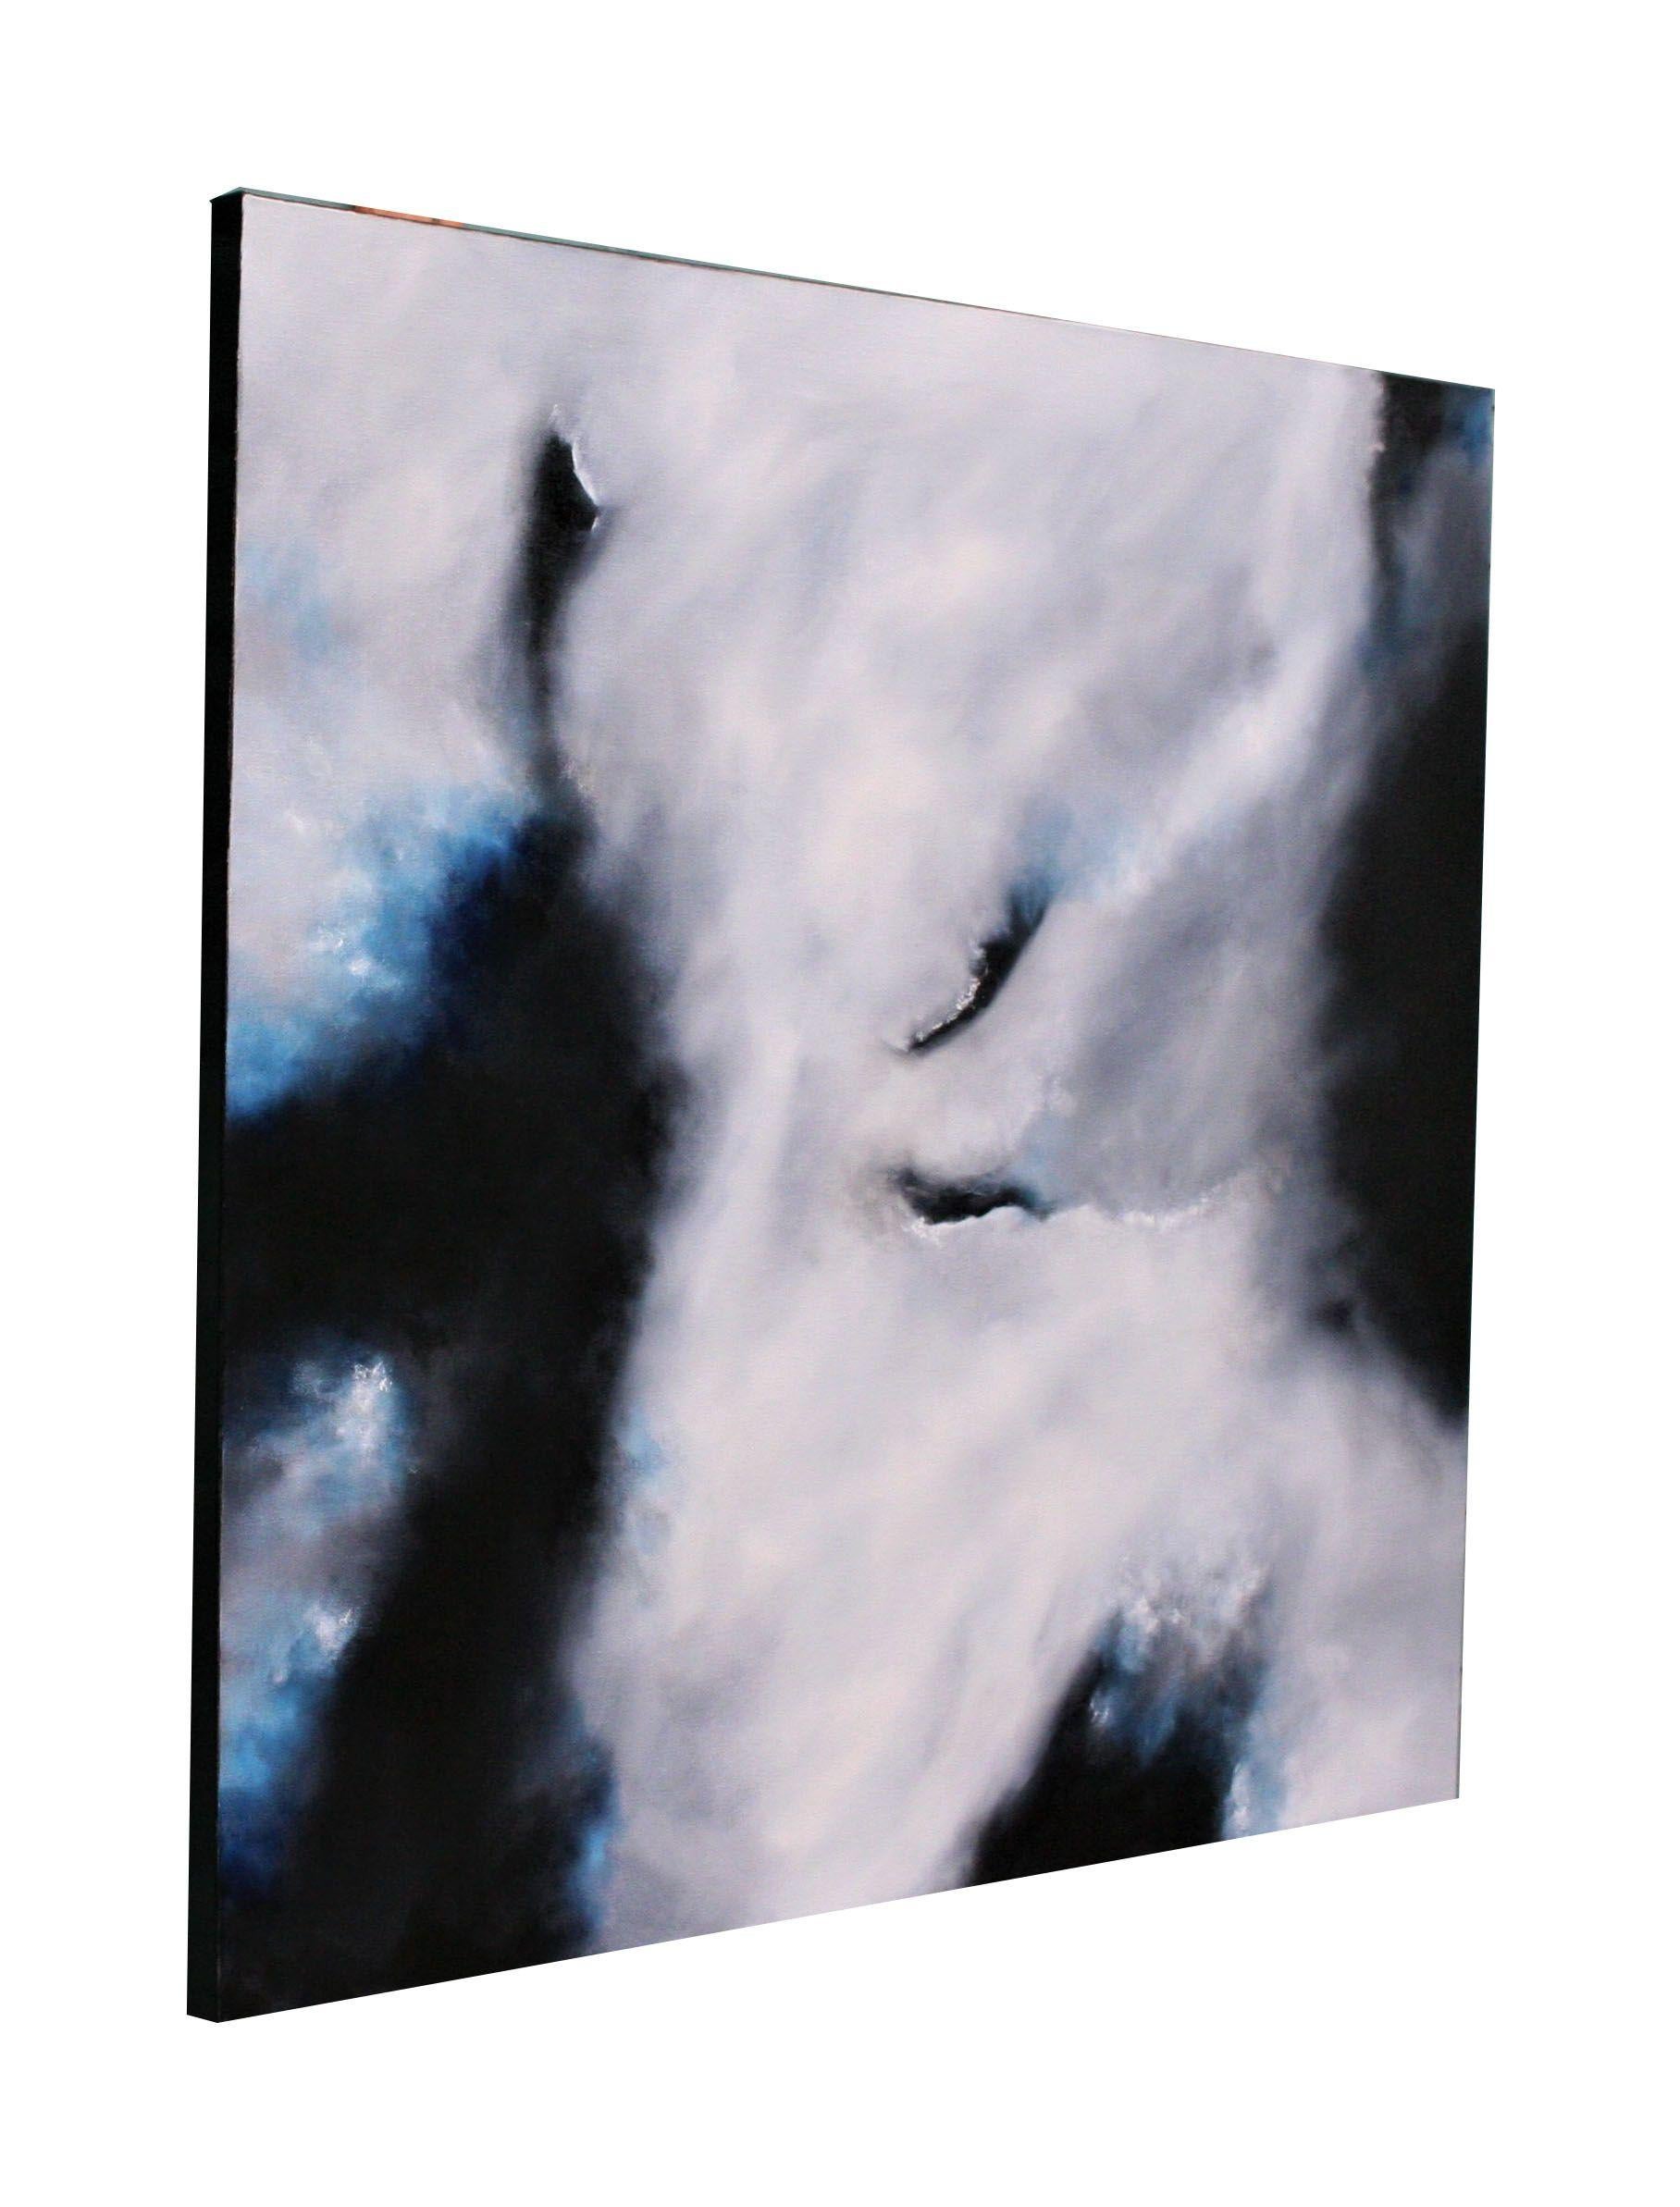 Every Cloud Has A Silver Lining Diptych, Painting, Oil on Canvas 2